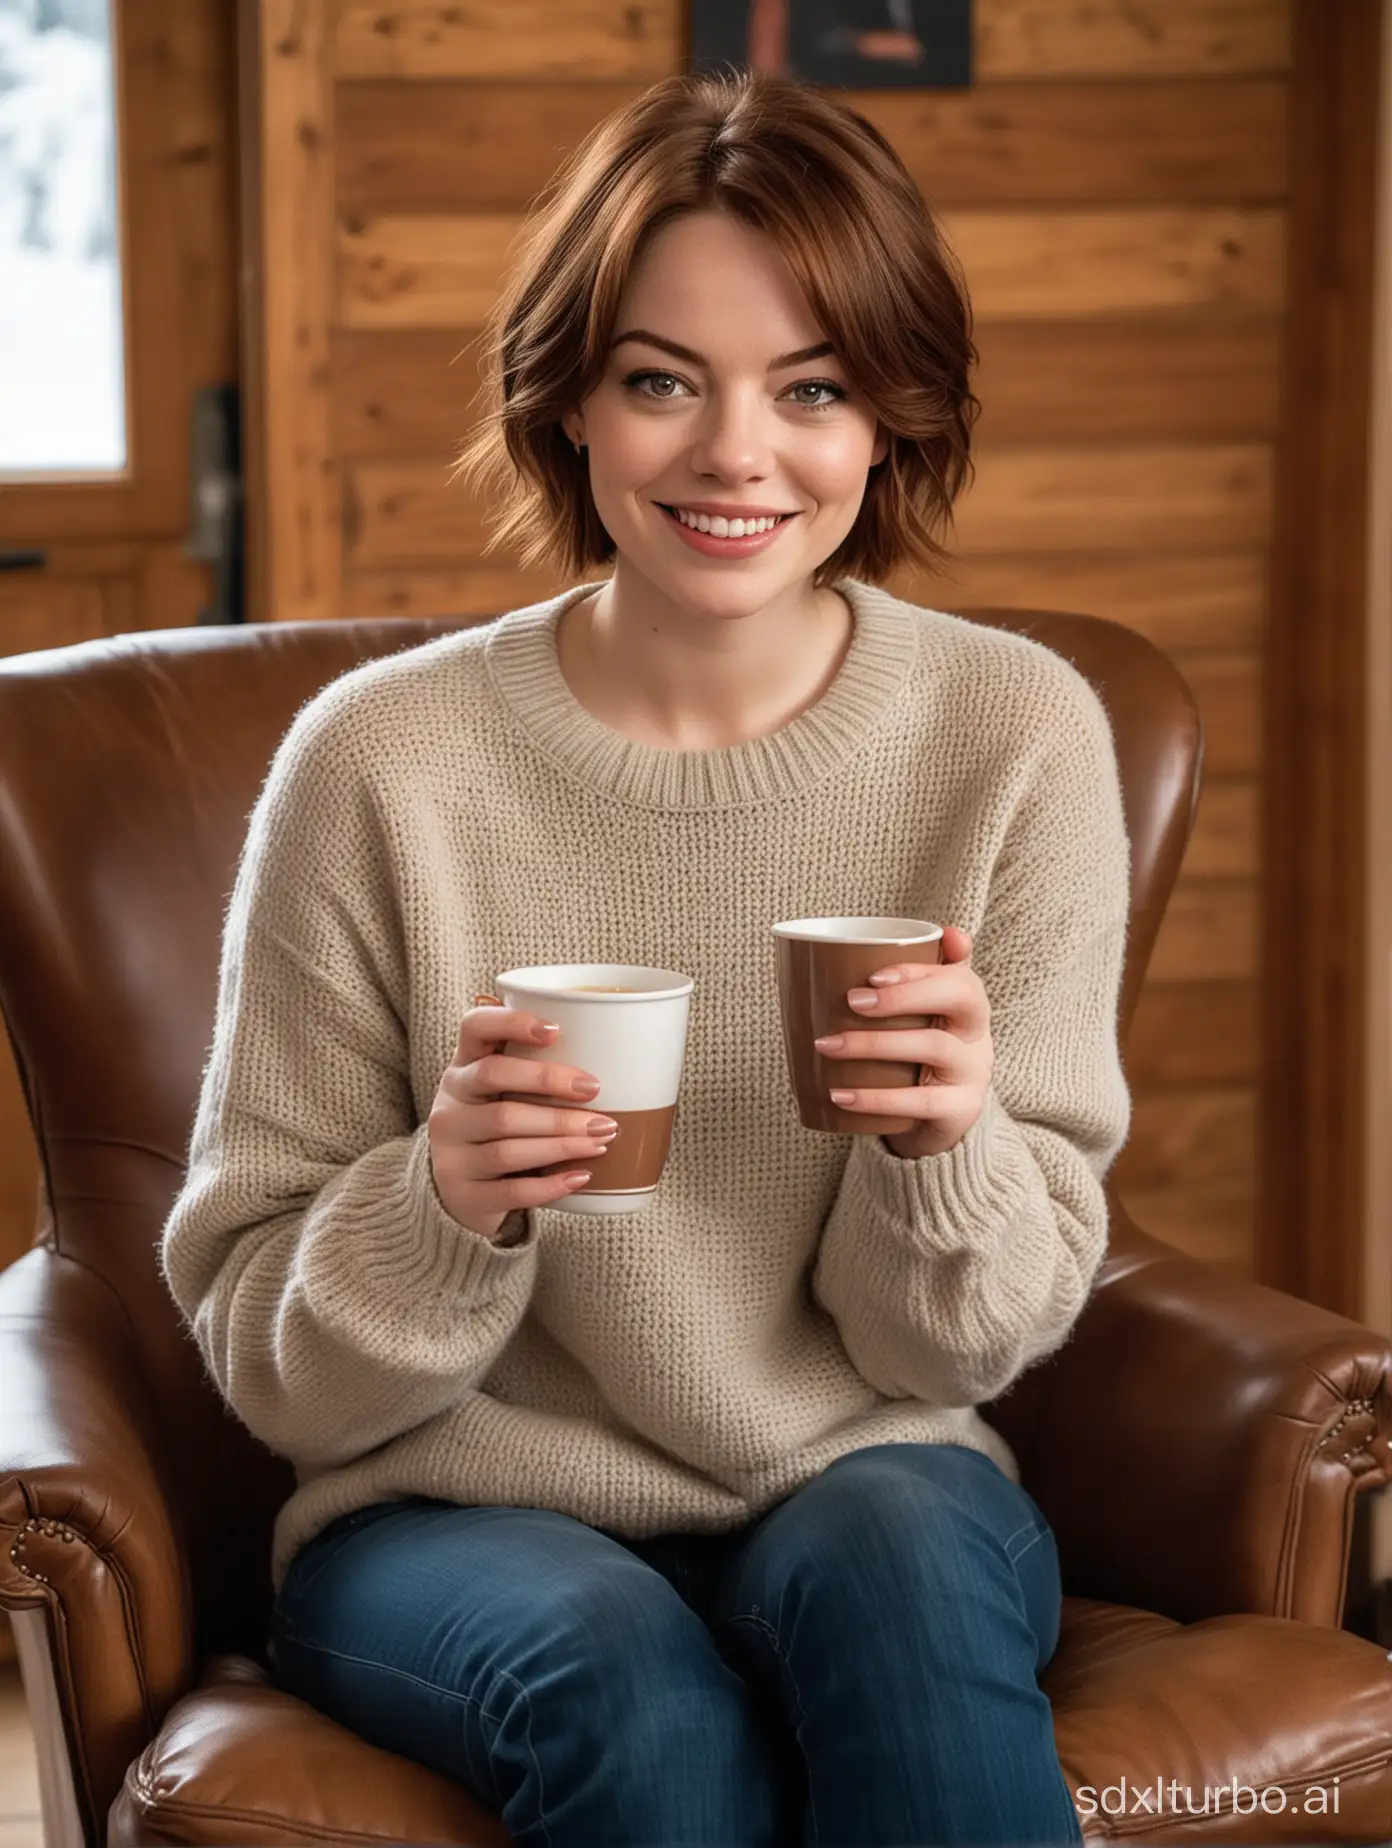 1 woman,like Emma stone, huge breast,short hair, at a ski chalet, holding a cup of hot chocolate, smile, sitting in a leather chair, sweater, jeans